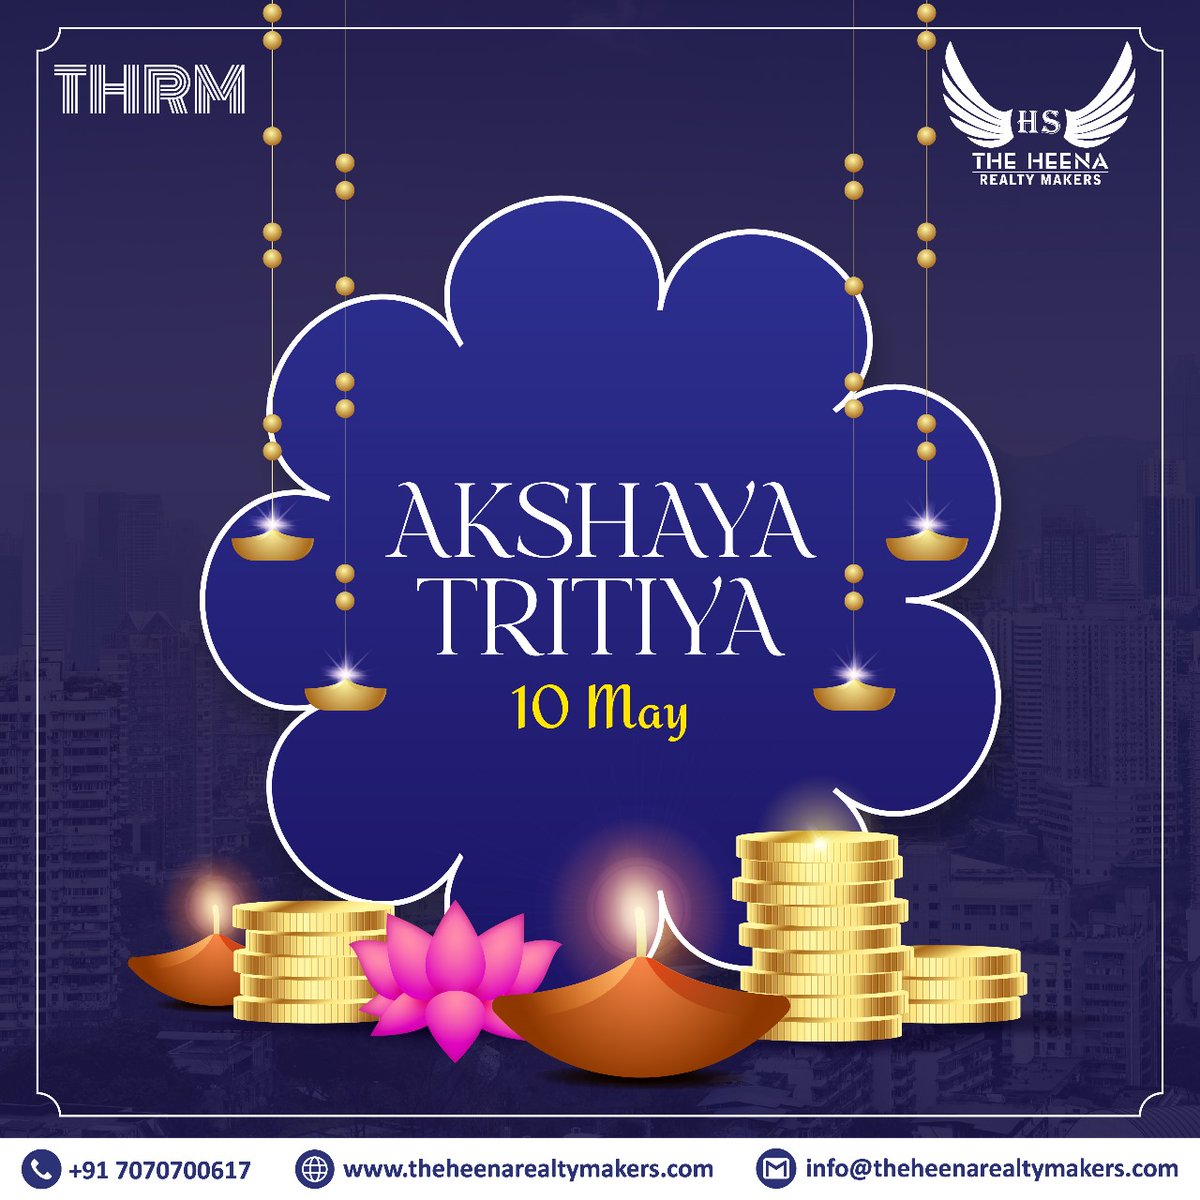 🌟 Happy #AkshayTritiya from #The_Heena_Realty_Makers! 🎉 May this day bring endless opportunities, unfading prosperity, and unbounded happiness. Let's build legacies that stand the test of time. Here's to growth, abundance, and joy! 🏠✨ #EternalProsperity